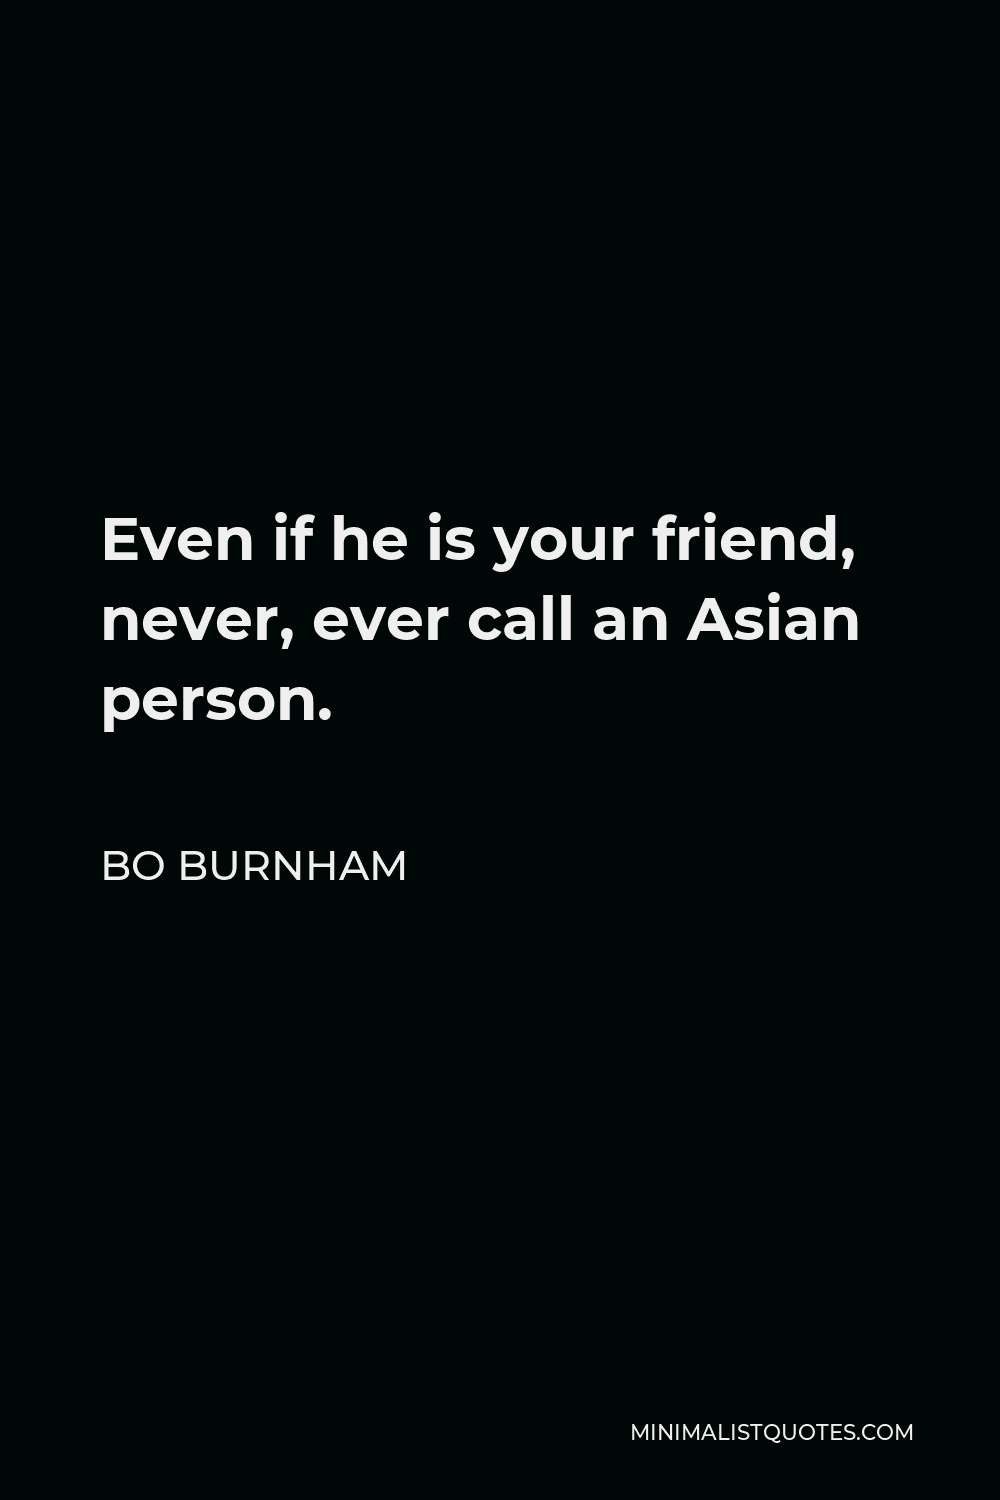 Bo Burnham Quote - Even if he is your friend, never, ever call an Asian person.